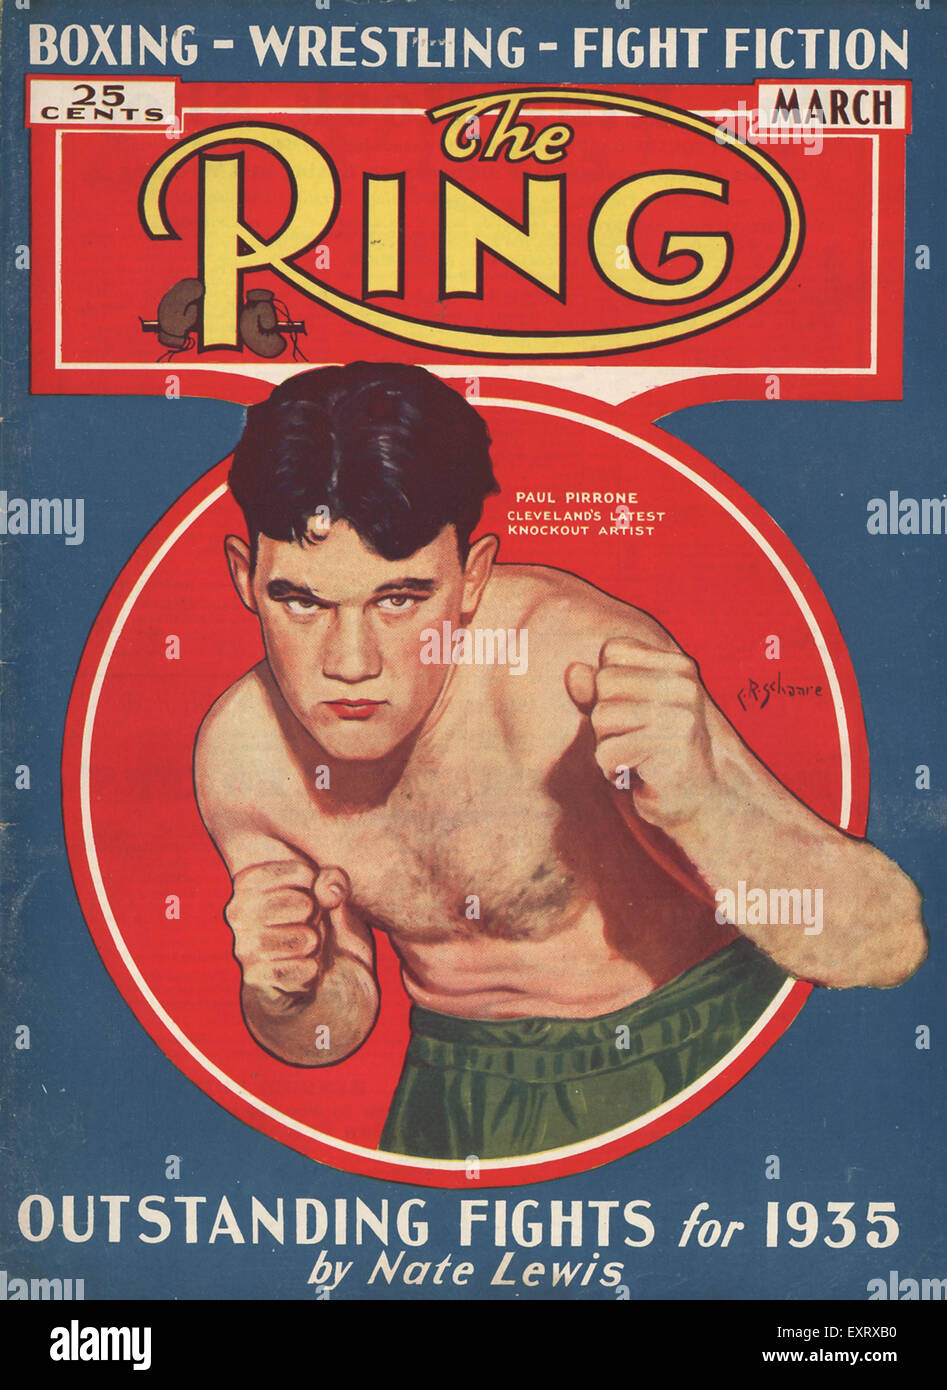 The Ring Magazine High Resolution Stock Photography and Images - Alamy